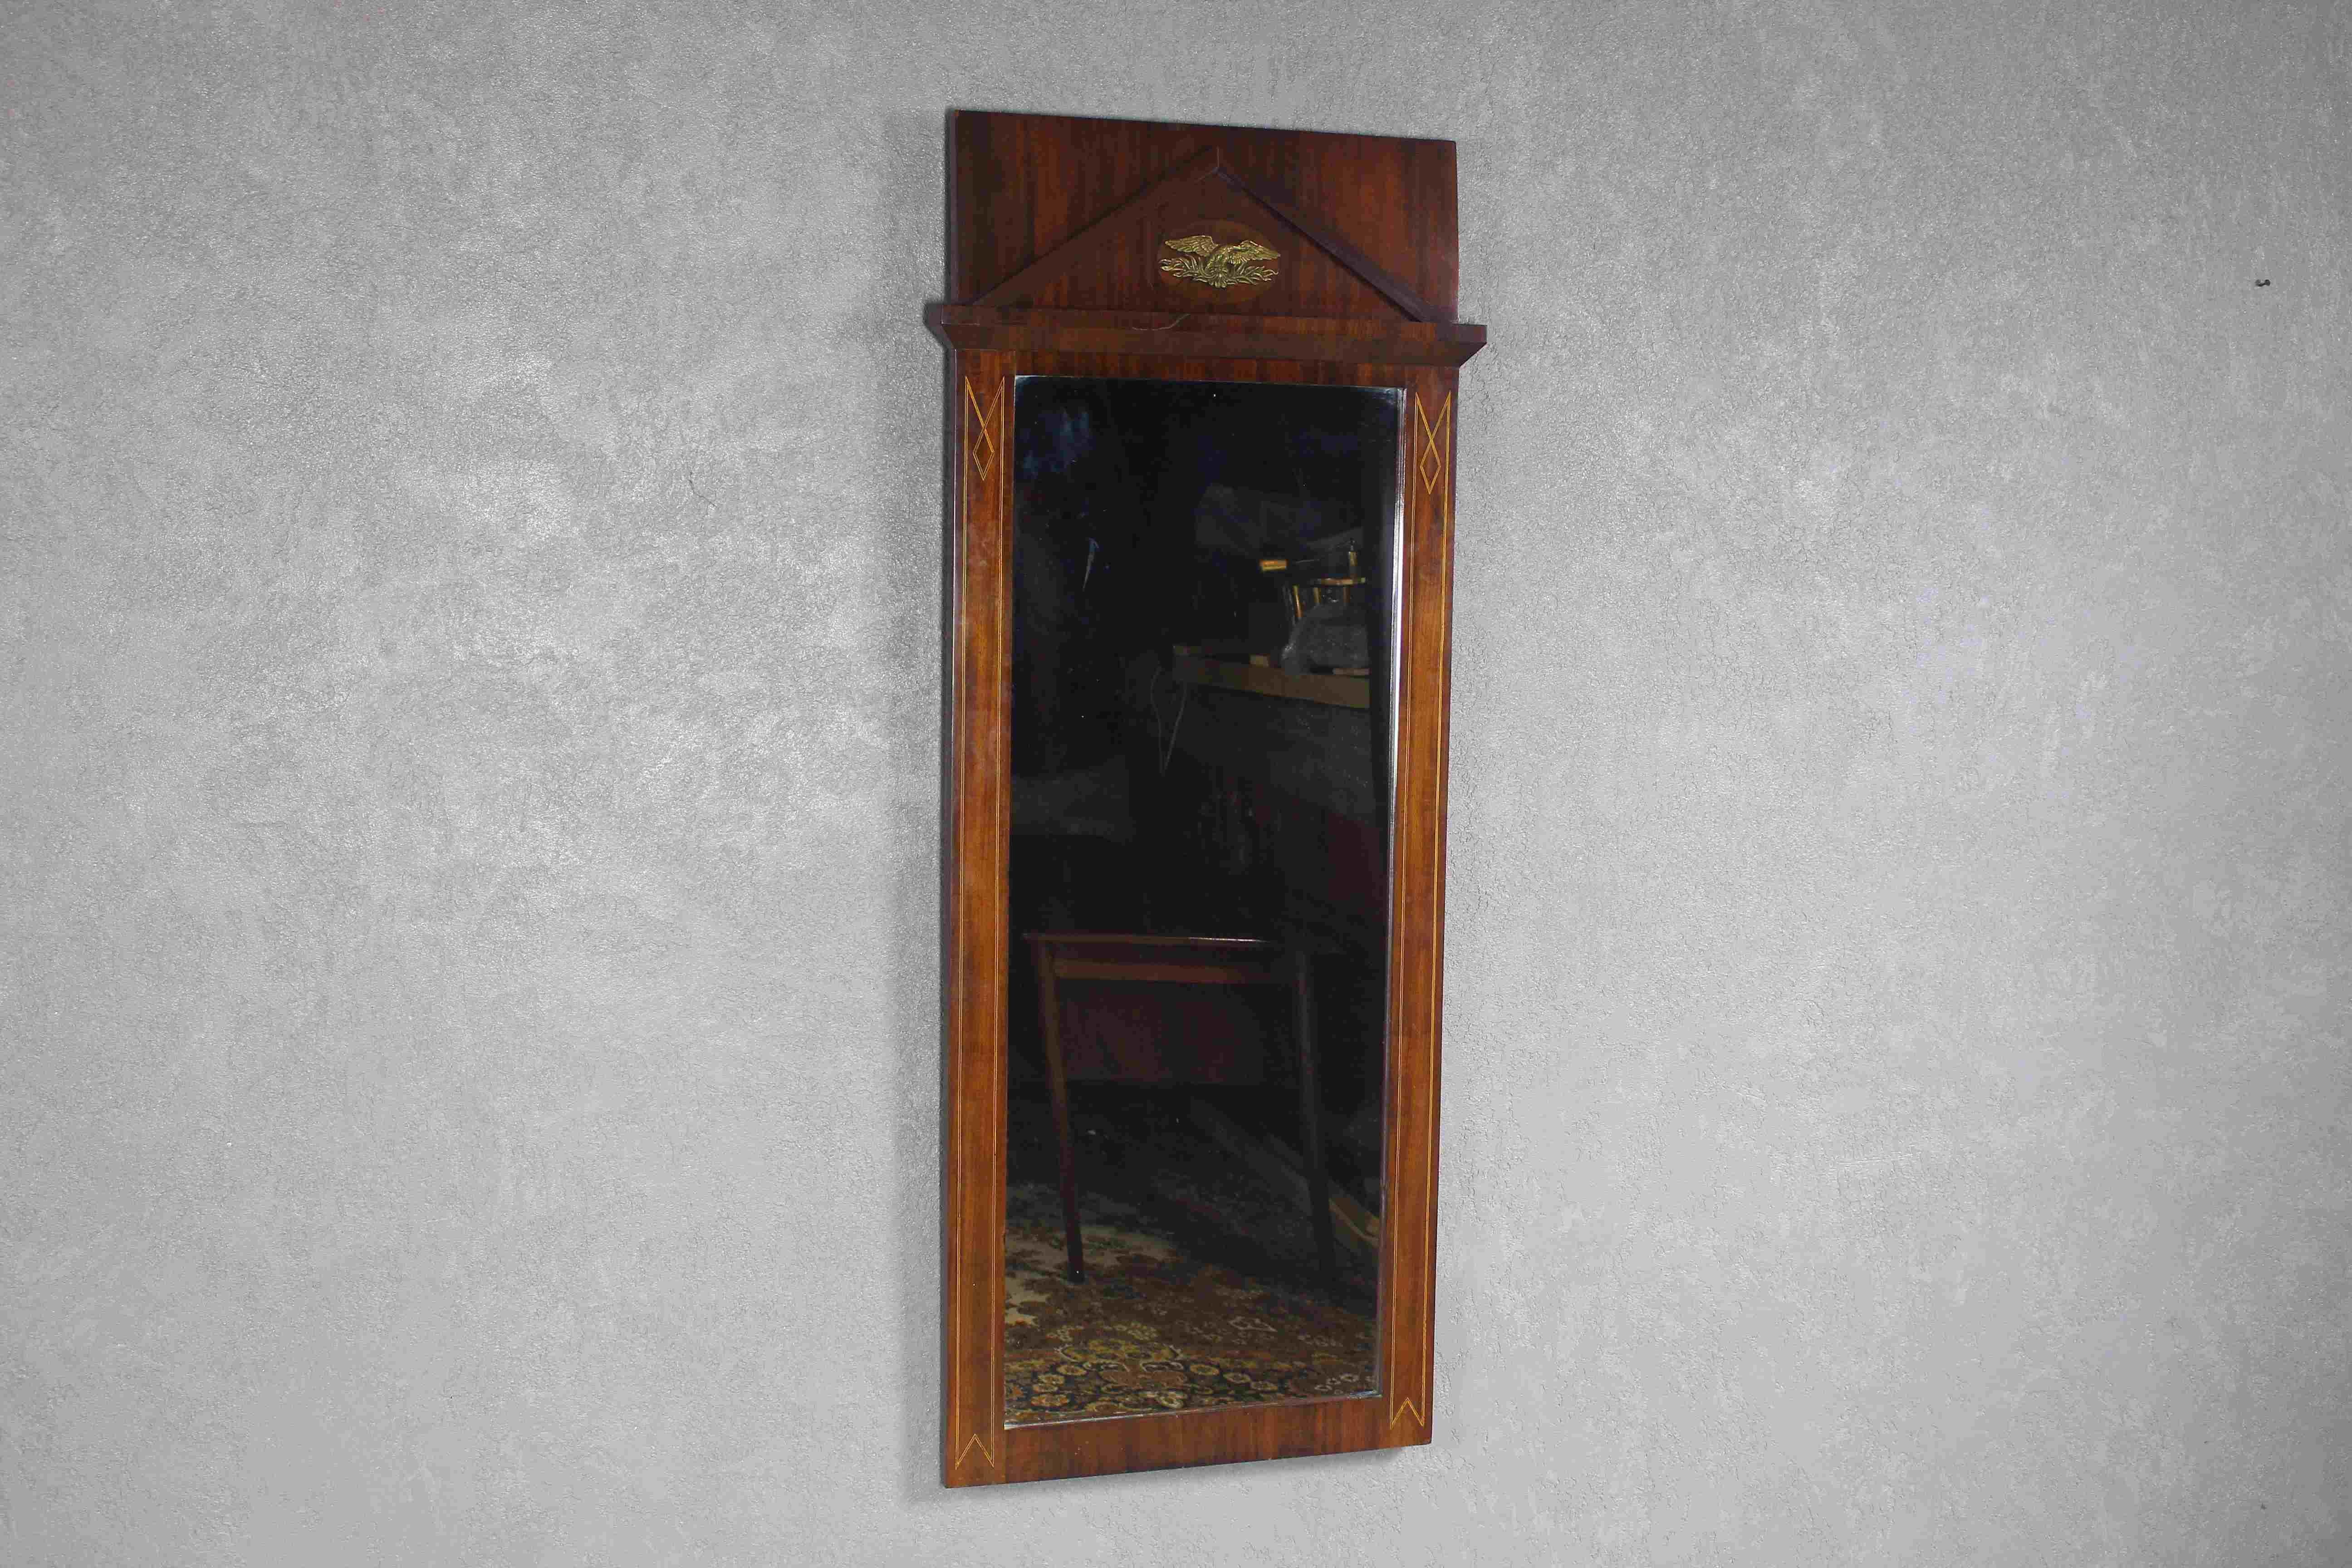 Antique Empire style mirror from the end of the 19th century.
The Mirror of hand-polished mahogany is a beautifully crafted piece of furniture that was made in Denmark during the late Empire period.